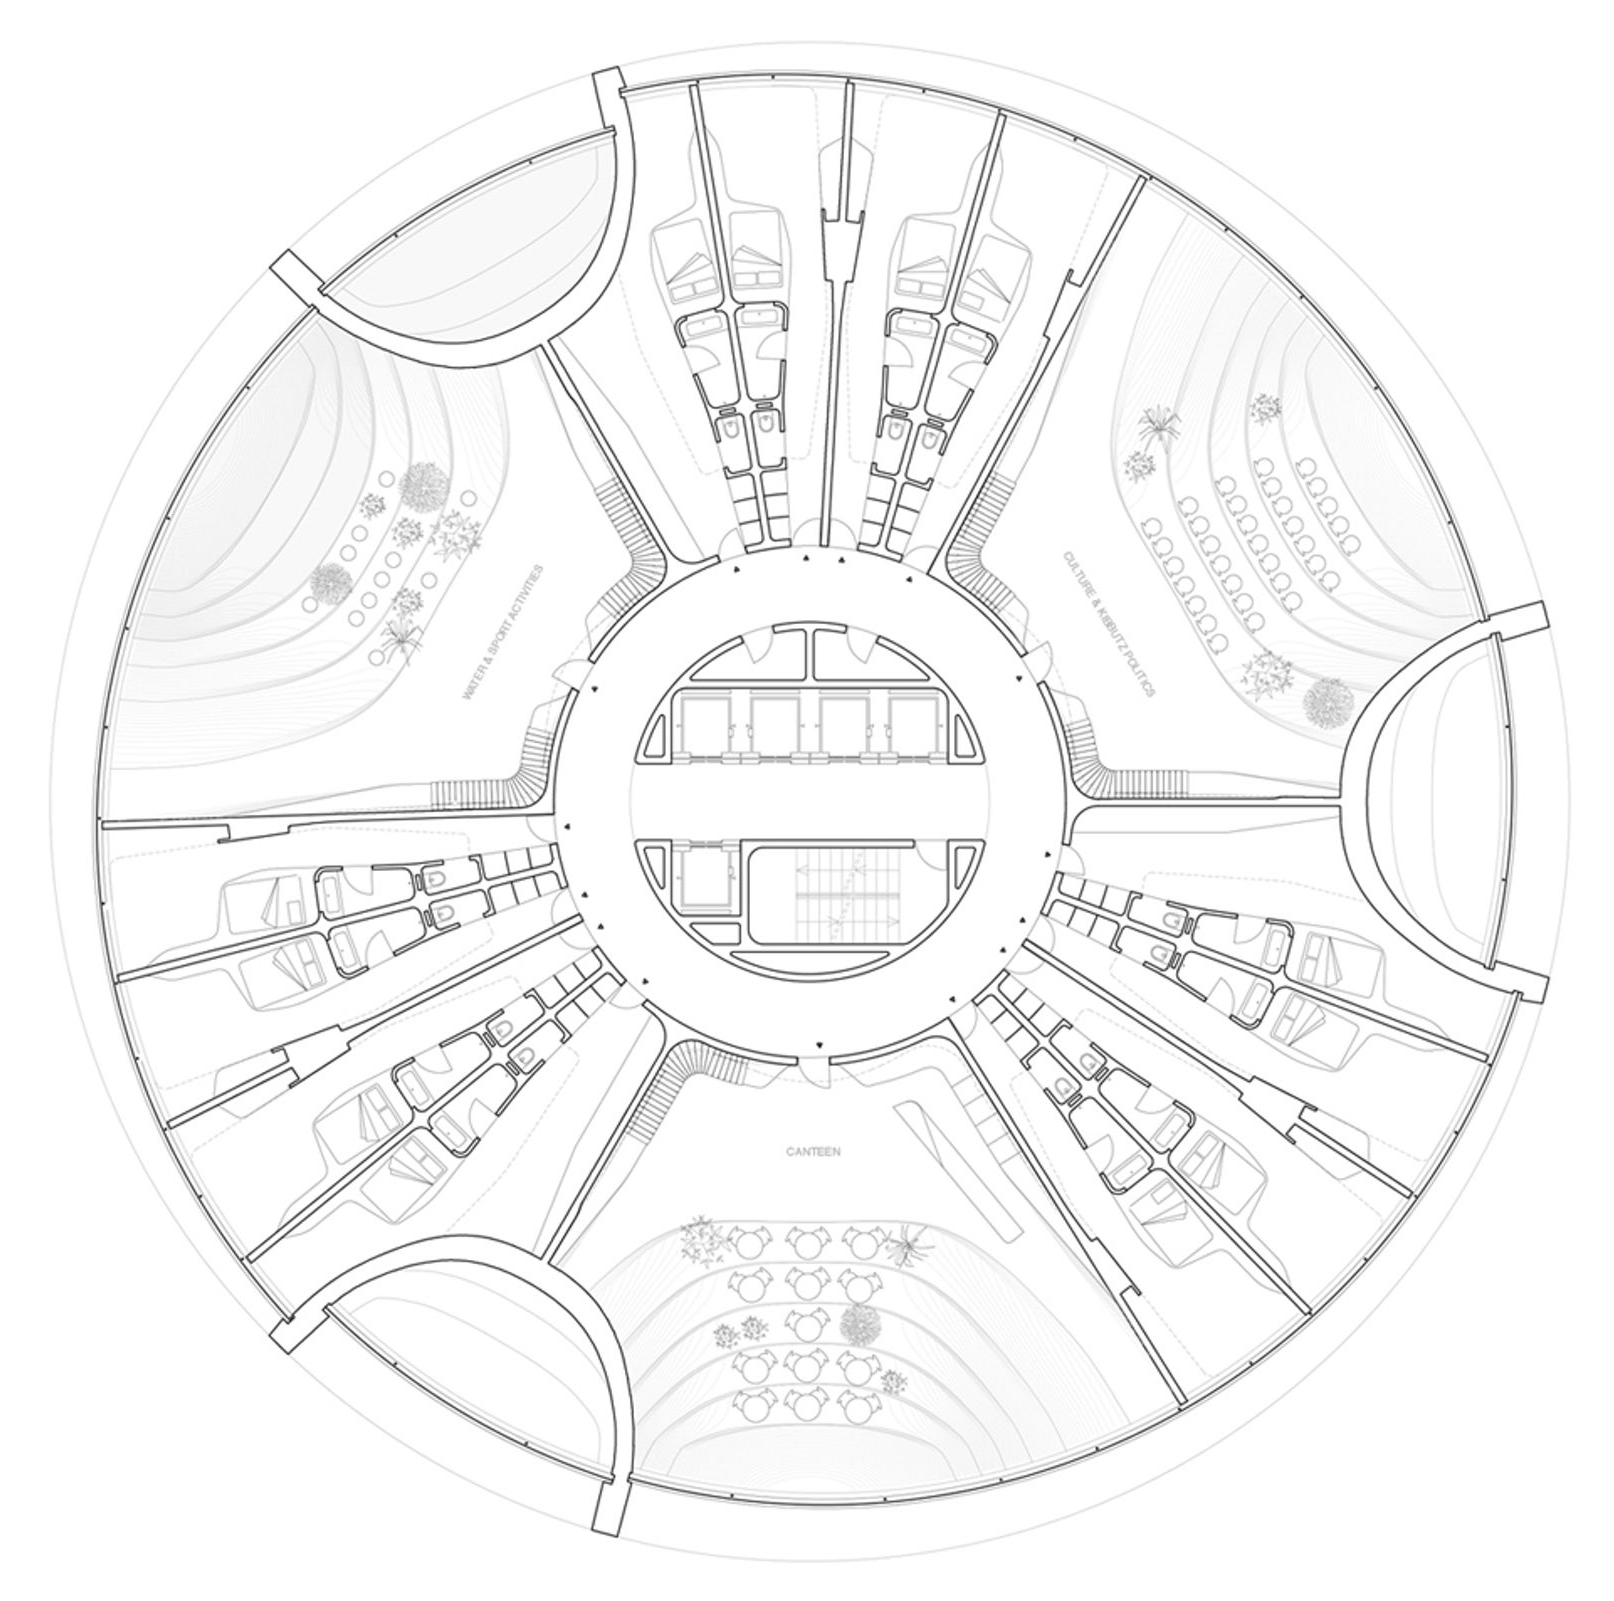 Architectural Drawings 8 Circular Plans That Defy Convention  Architizer  Journal